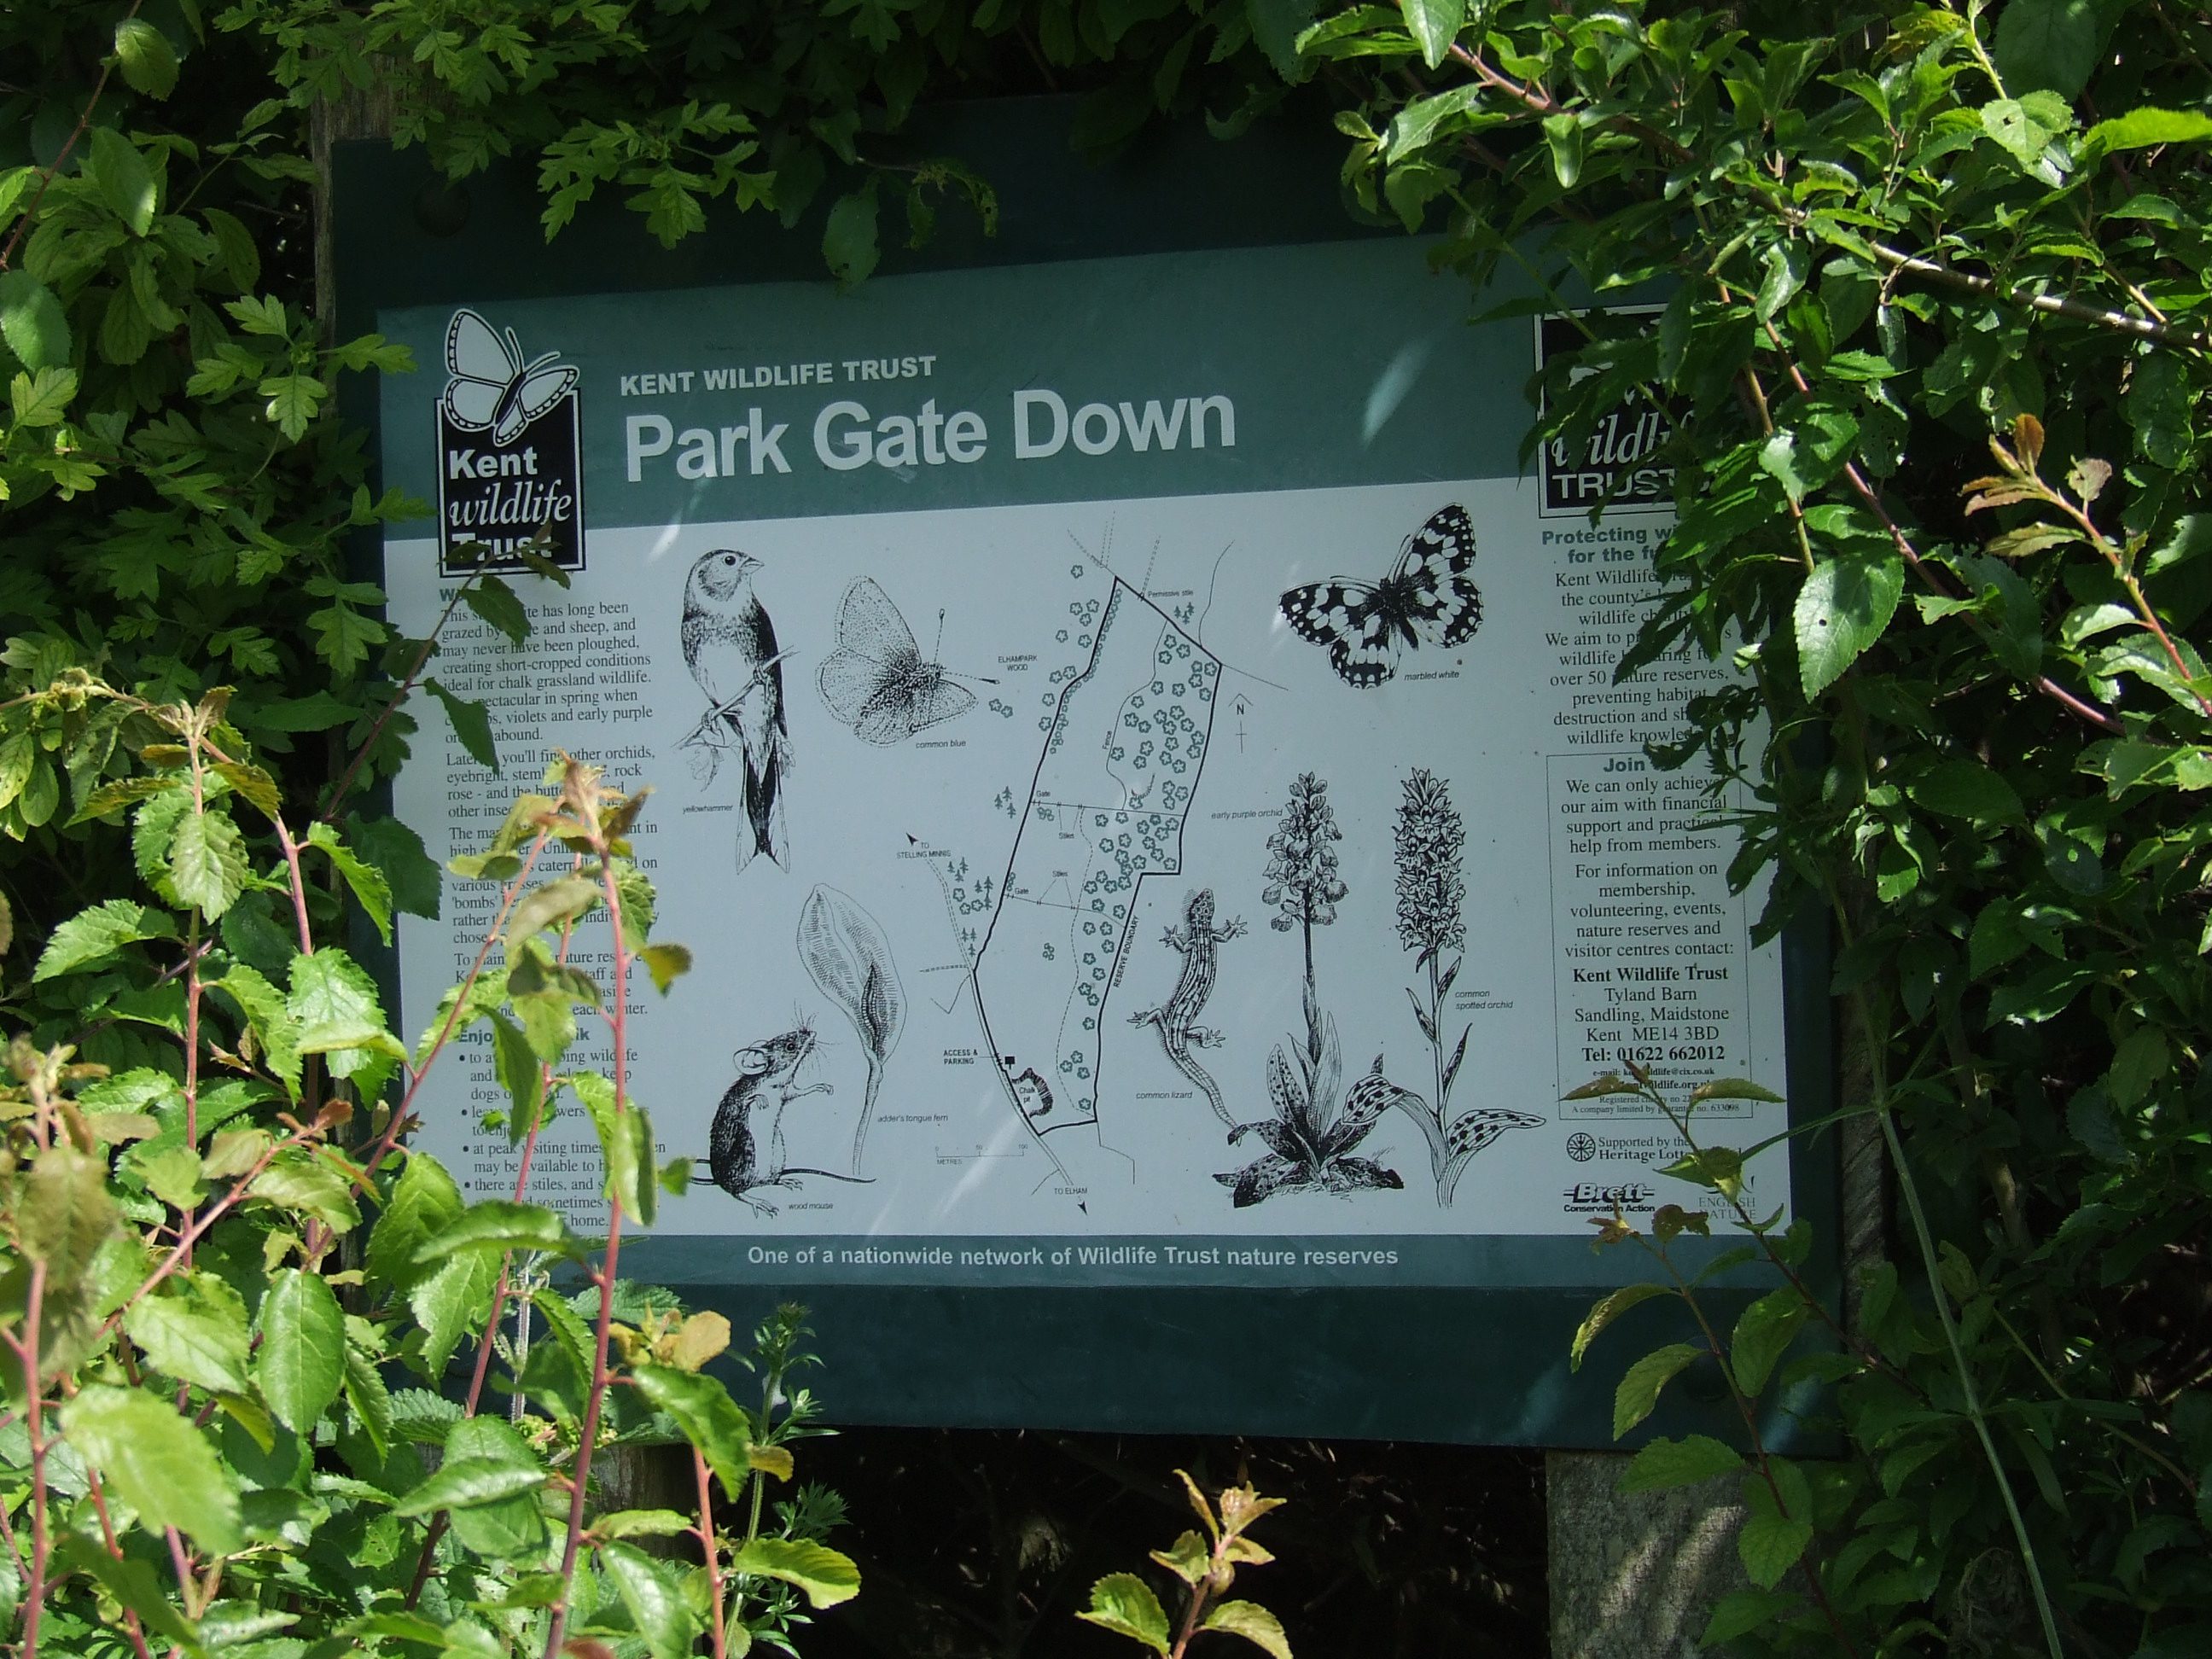 The information board at Park Gate Down Nature Reserve